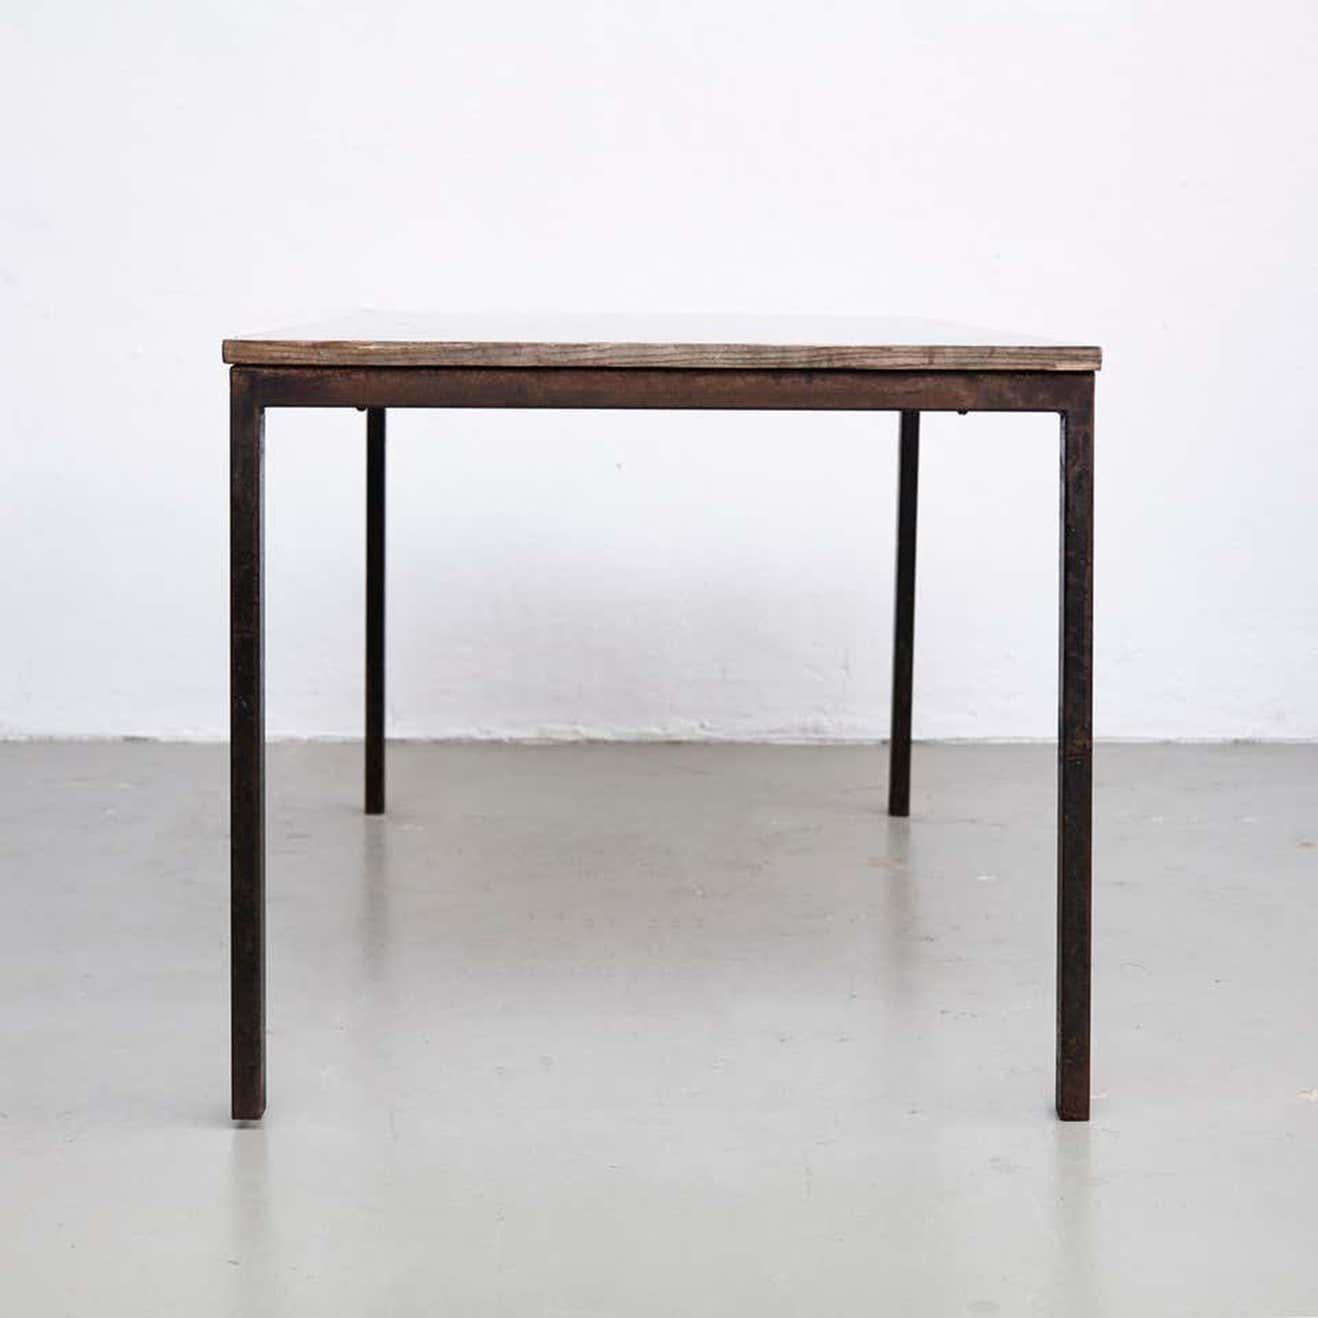 French Charlotte Perriand, Mid-Century Modern, Wood Metal Cansado Table, circa 1950 For Sale